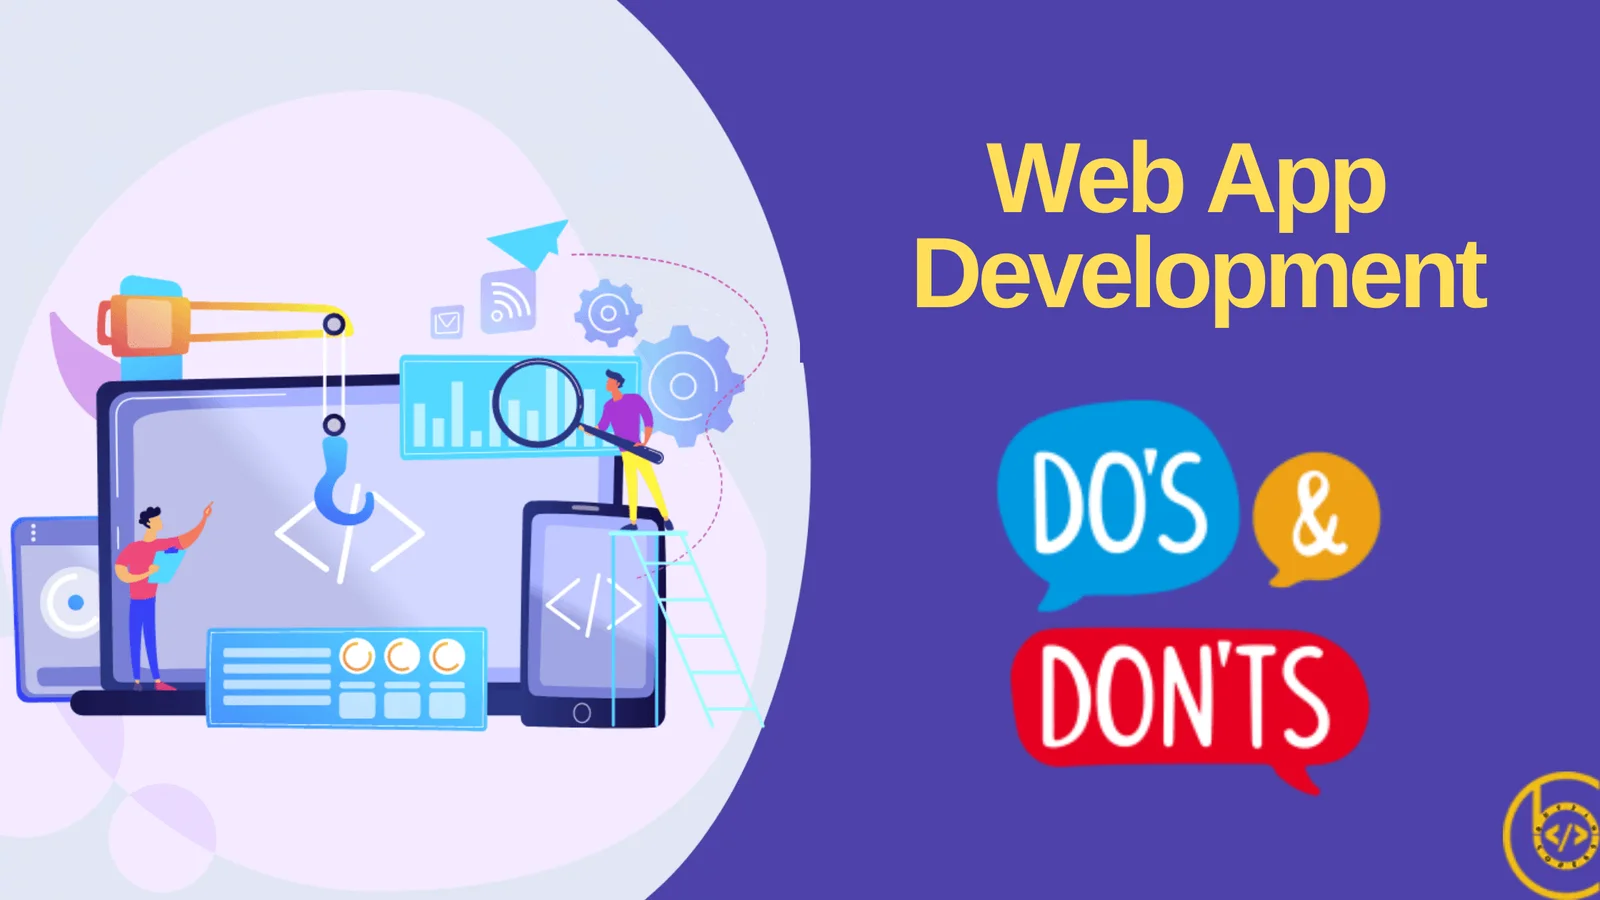 Web App Development Do’s and Don’ts to follow in 2022